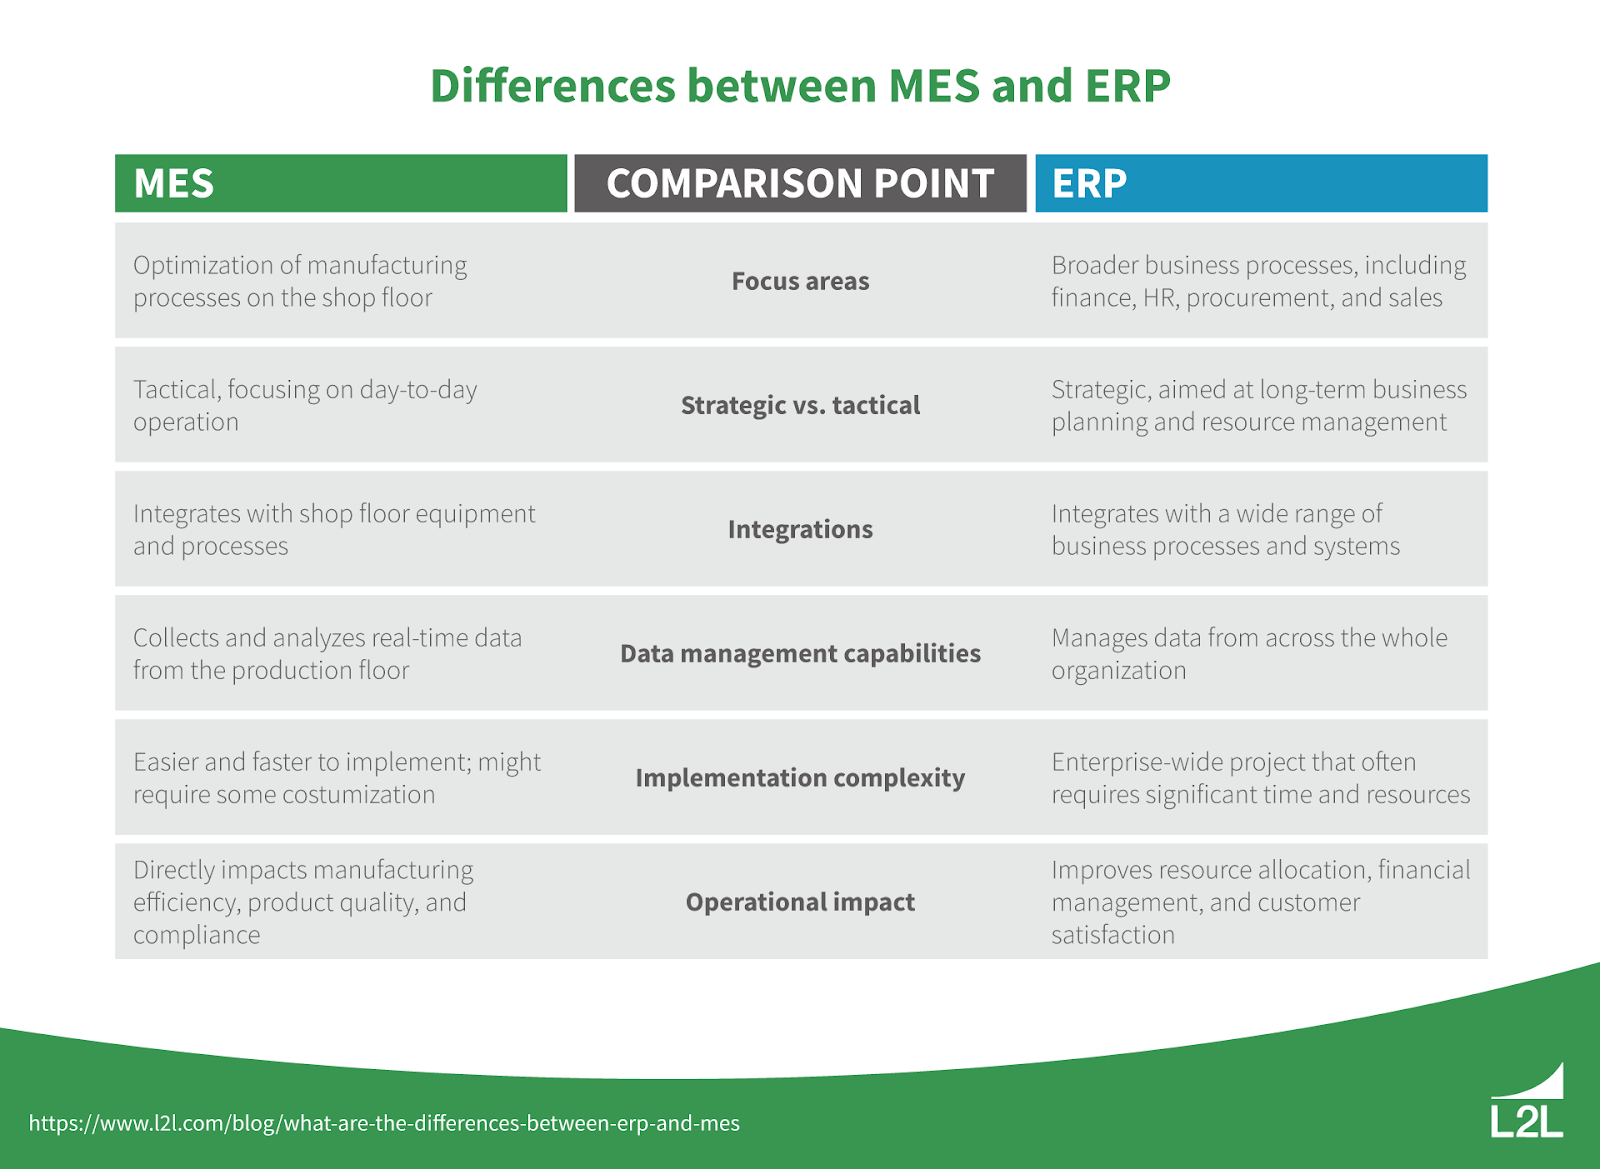 A table showing the differences between MES and ERP systems.